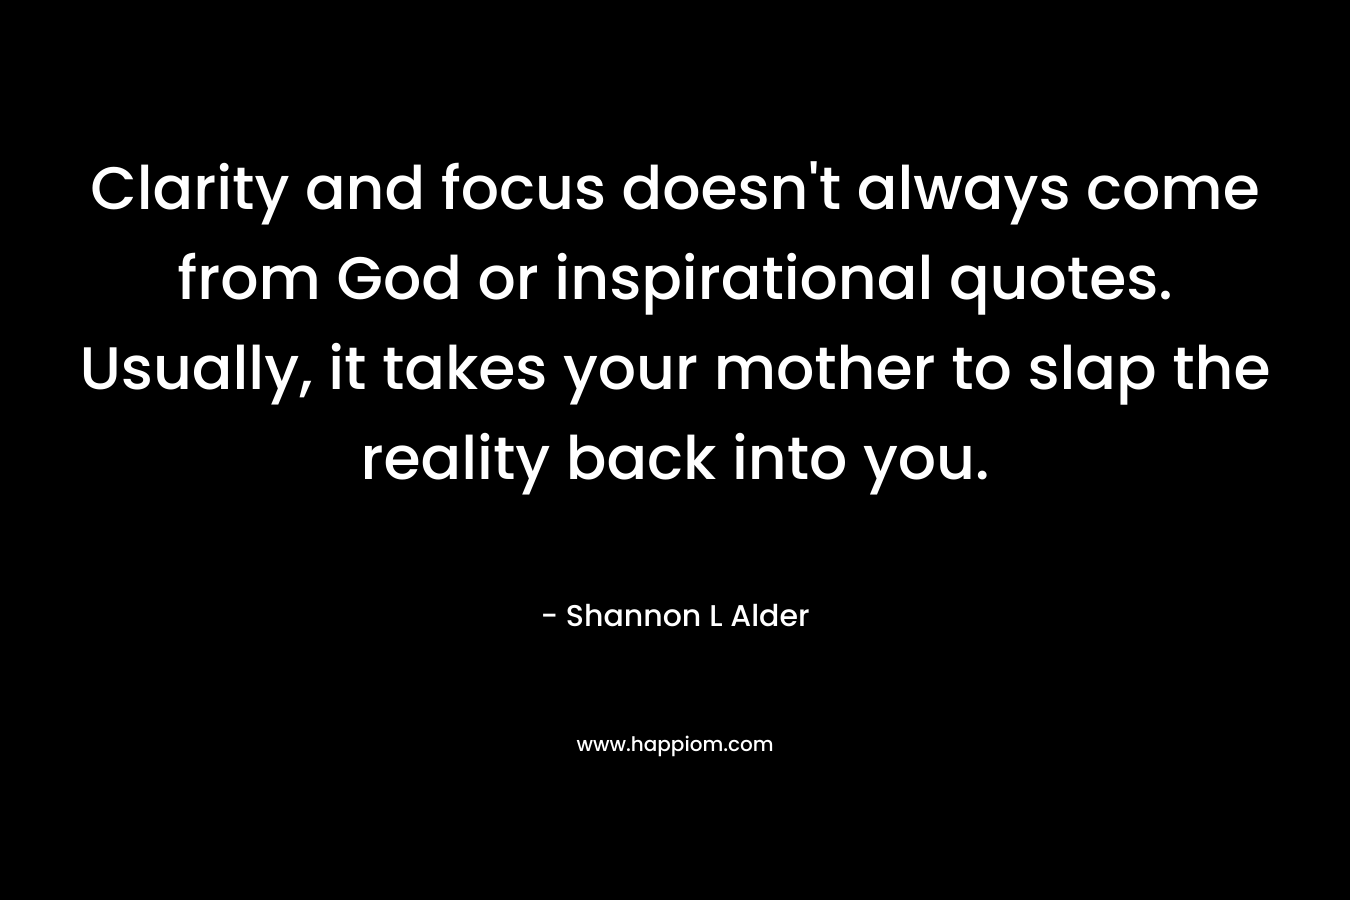 Clarity and focus doesn’t always come from God or inspirational quotes. Usually, it takes your mother to slap the reality back into you. – Shannon L Alder